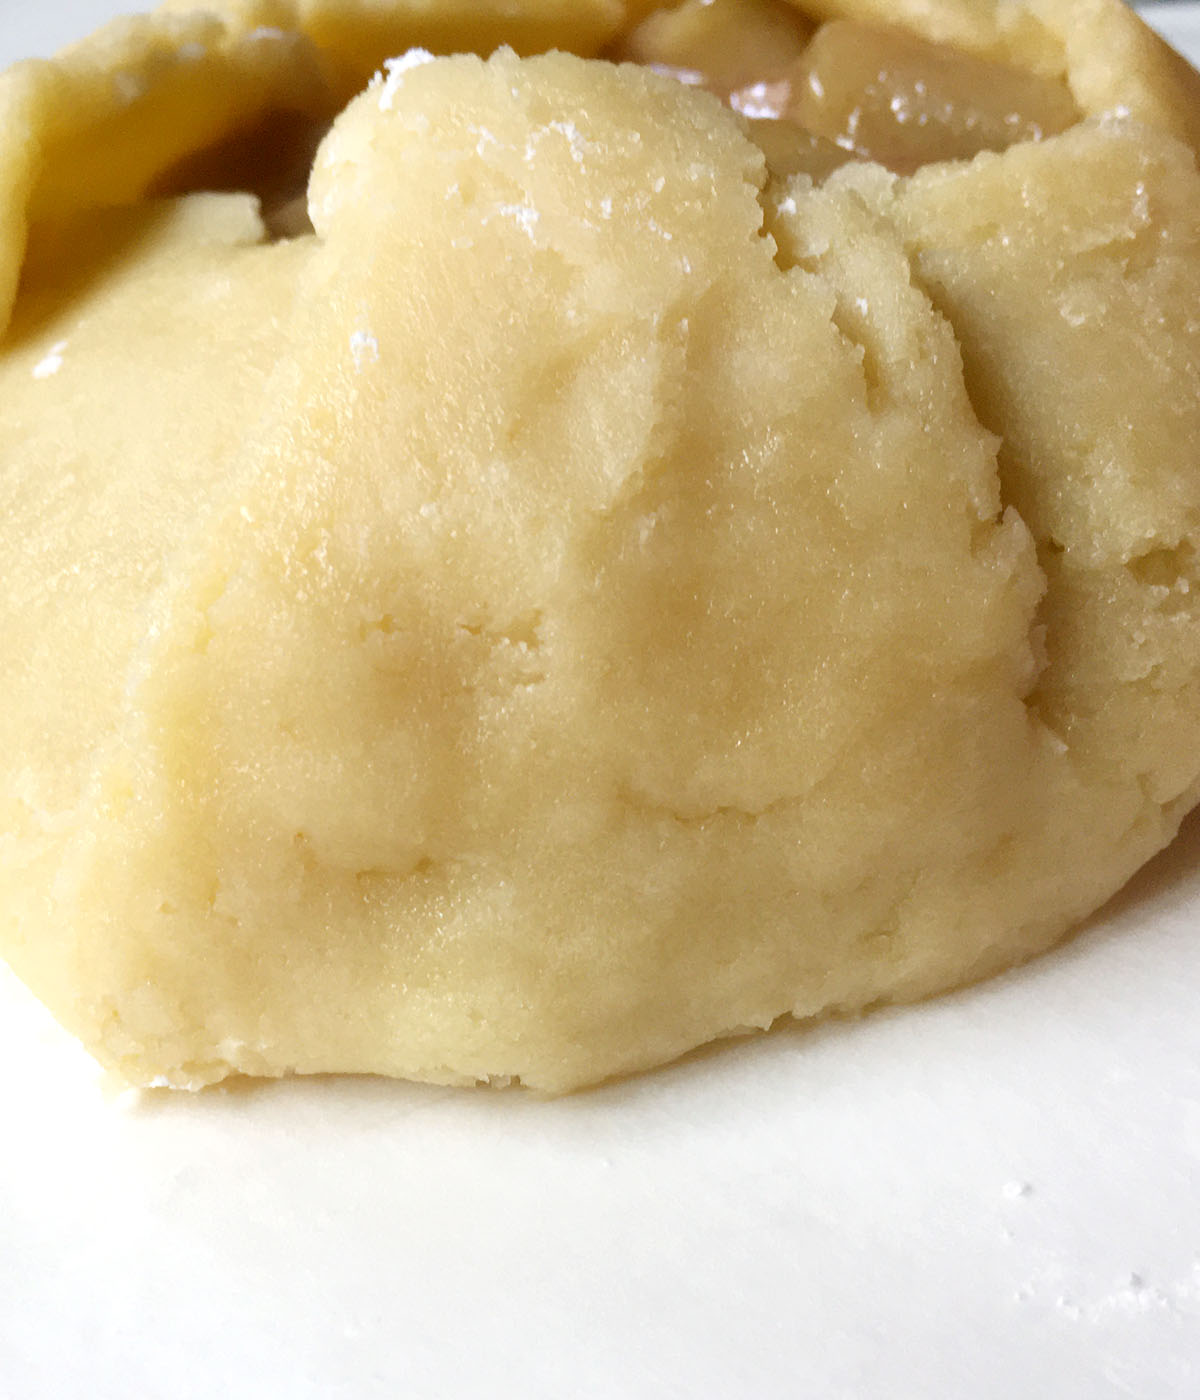 Close-up of pie crust dough with crack sealed up.